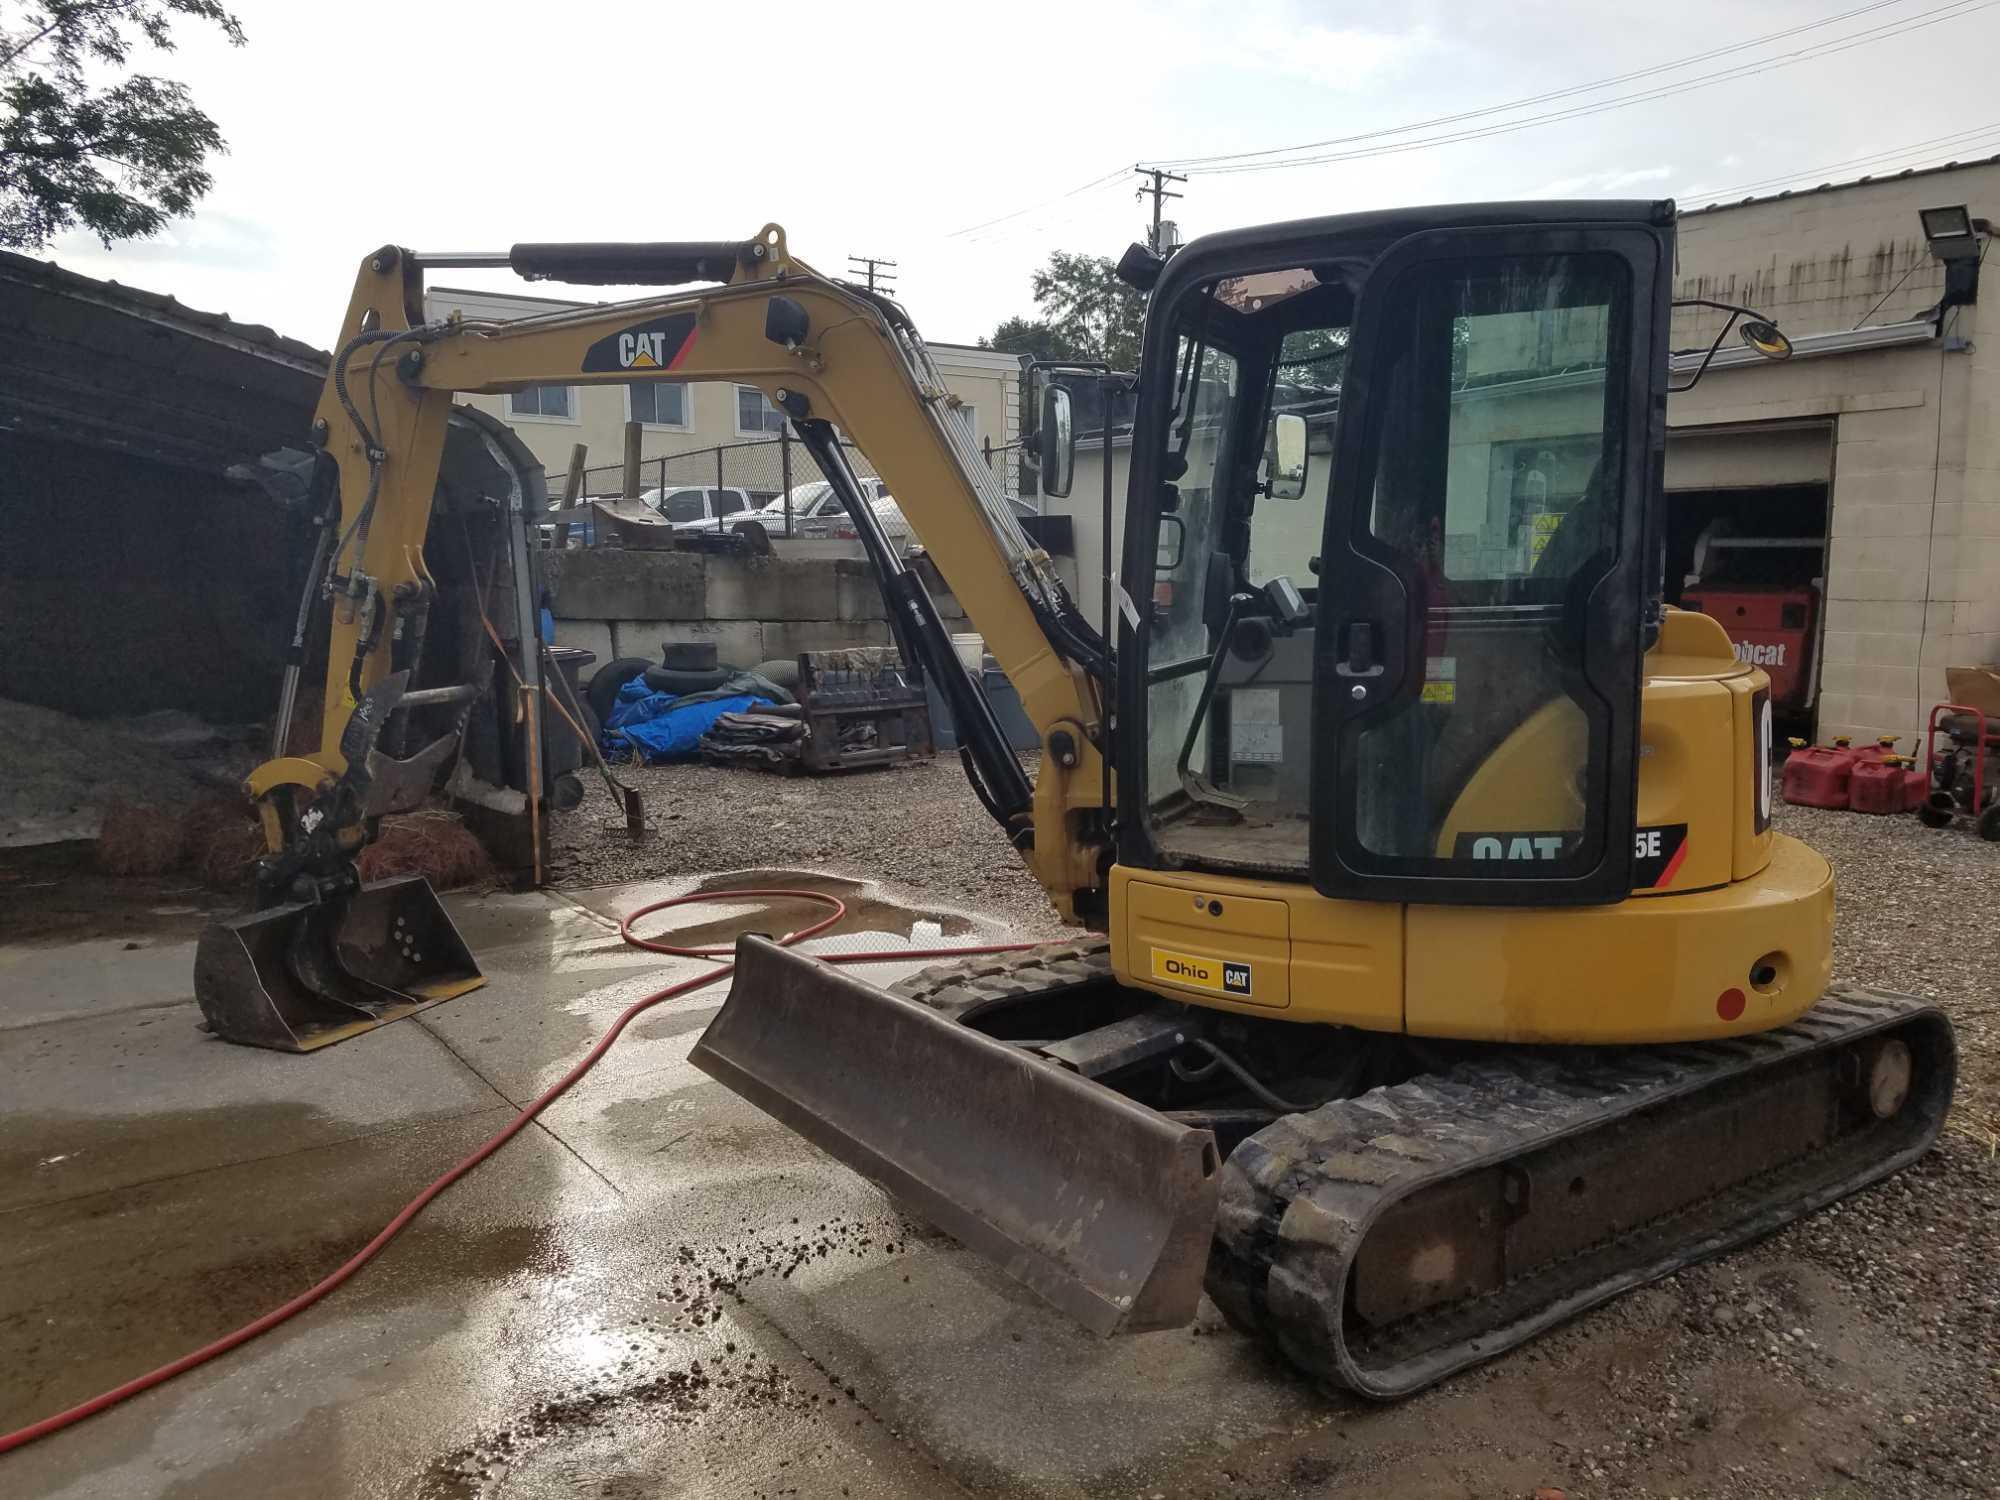 2016 Cat 305.5E mini excavator, 38 inch bucket, diesel, ac, with extra 21 inch bucket, 1,420 hours